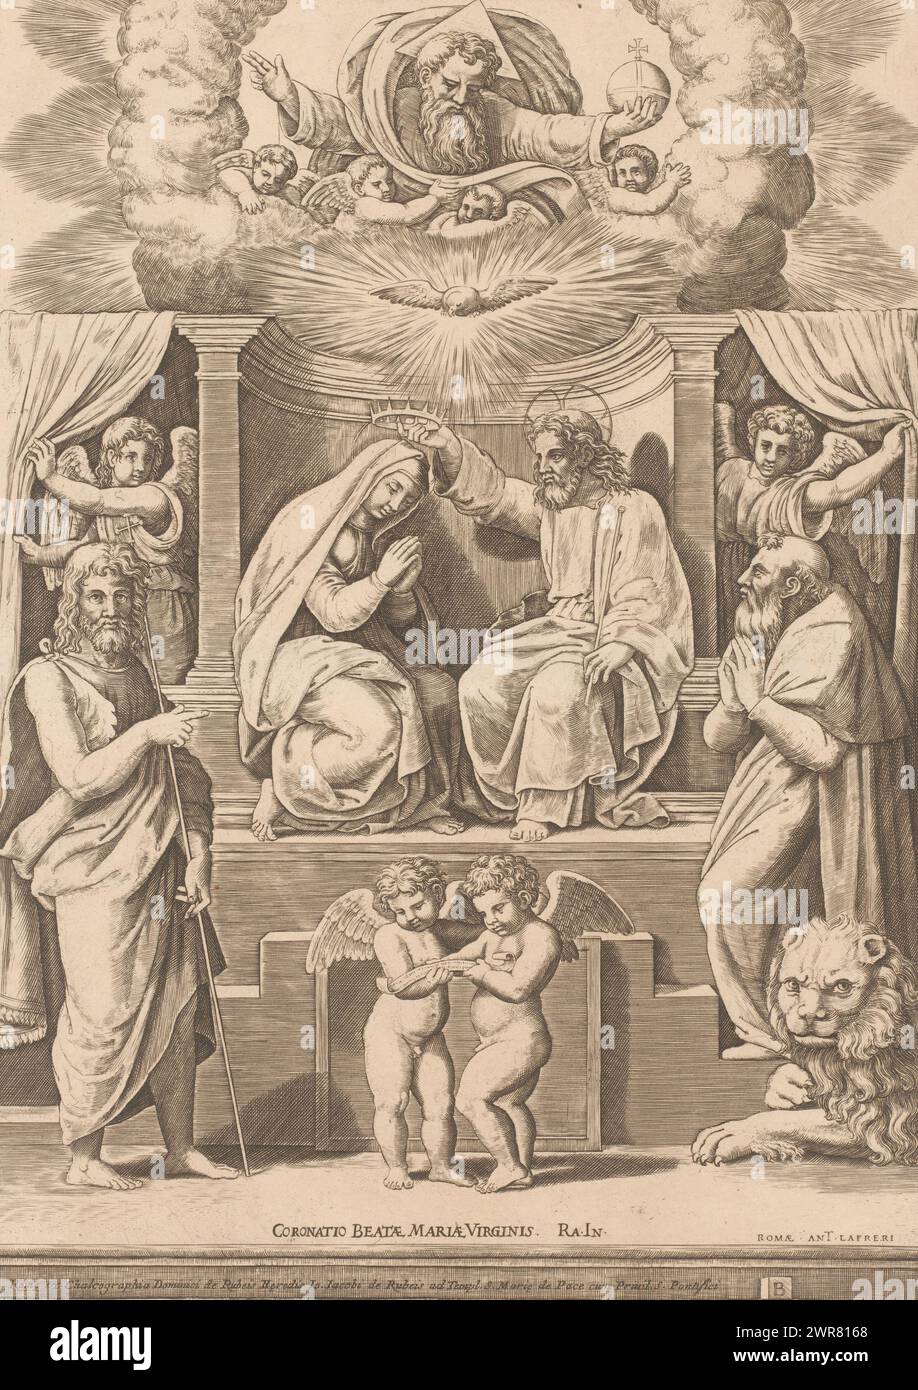 Mary crowned by Christ, Coronatio Beatae Mariae Virginis (title on object), In the middle Mary is crowned by Christ. In the foreground on the left is Saint John the Baptist and on the right is Saint Jerome with lion. In the sky God the Father and the Holy Spirit as a dove. Title bottom center., print maker: Meester van de Dobbelsteen, after design by: Rafaël, publisher: Antonio Lafreri, print maker: Italy, after design by: Italy, publisher: Rome, publisher: Italy, publisher: Rome, Vatican City, c. 1530 - c. 1560 and/or 1691 - 1729, paper, engraving, etching, width 361 mm × height 260 mm Stock Photo